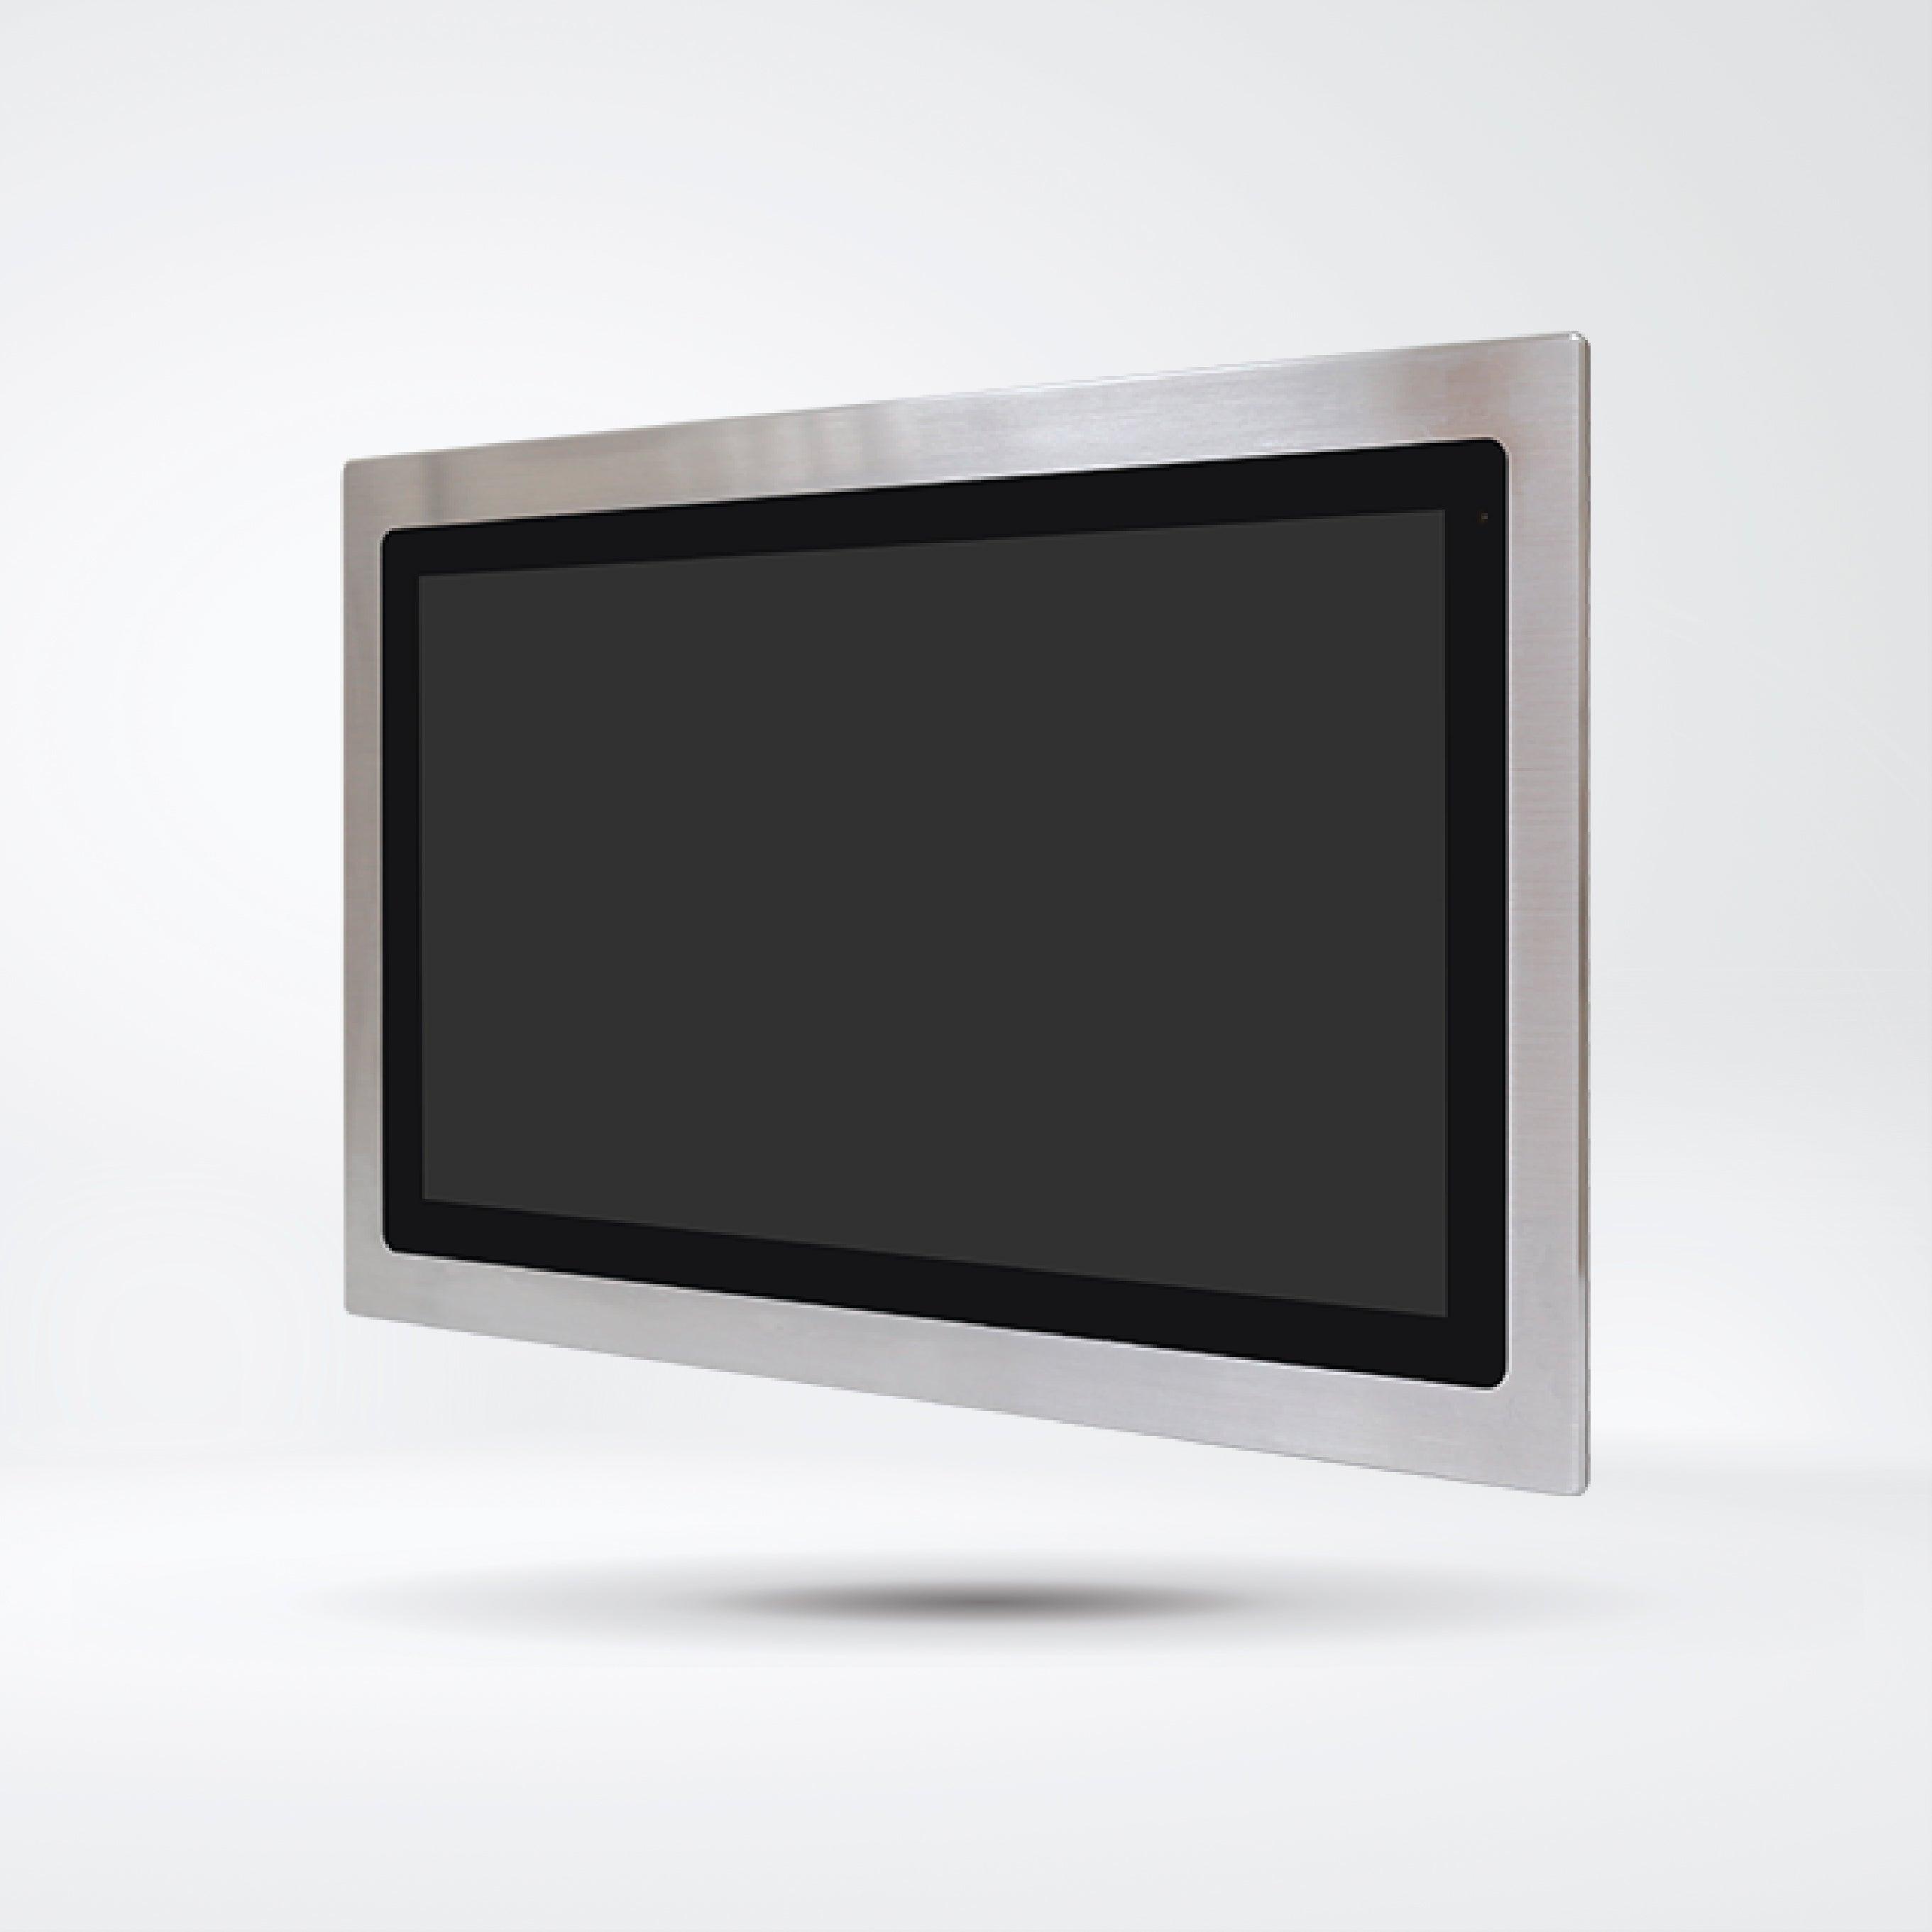 FABS-121RH 21.5” Flat Front Panel IP66 Stainless Chassis Display - Riverplus